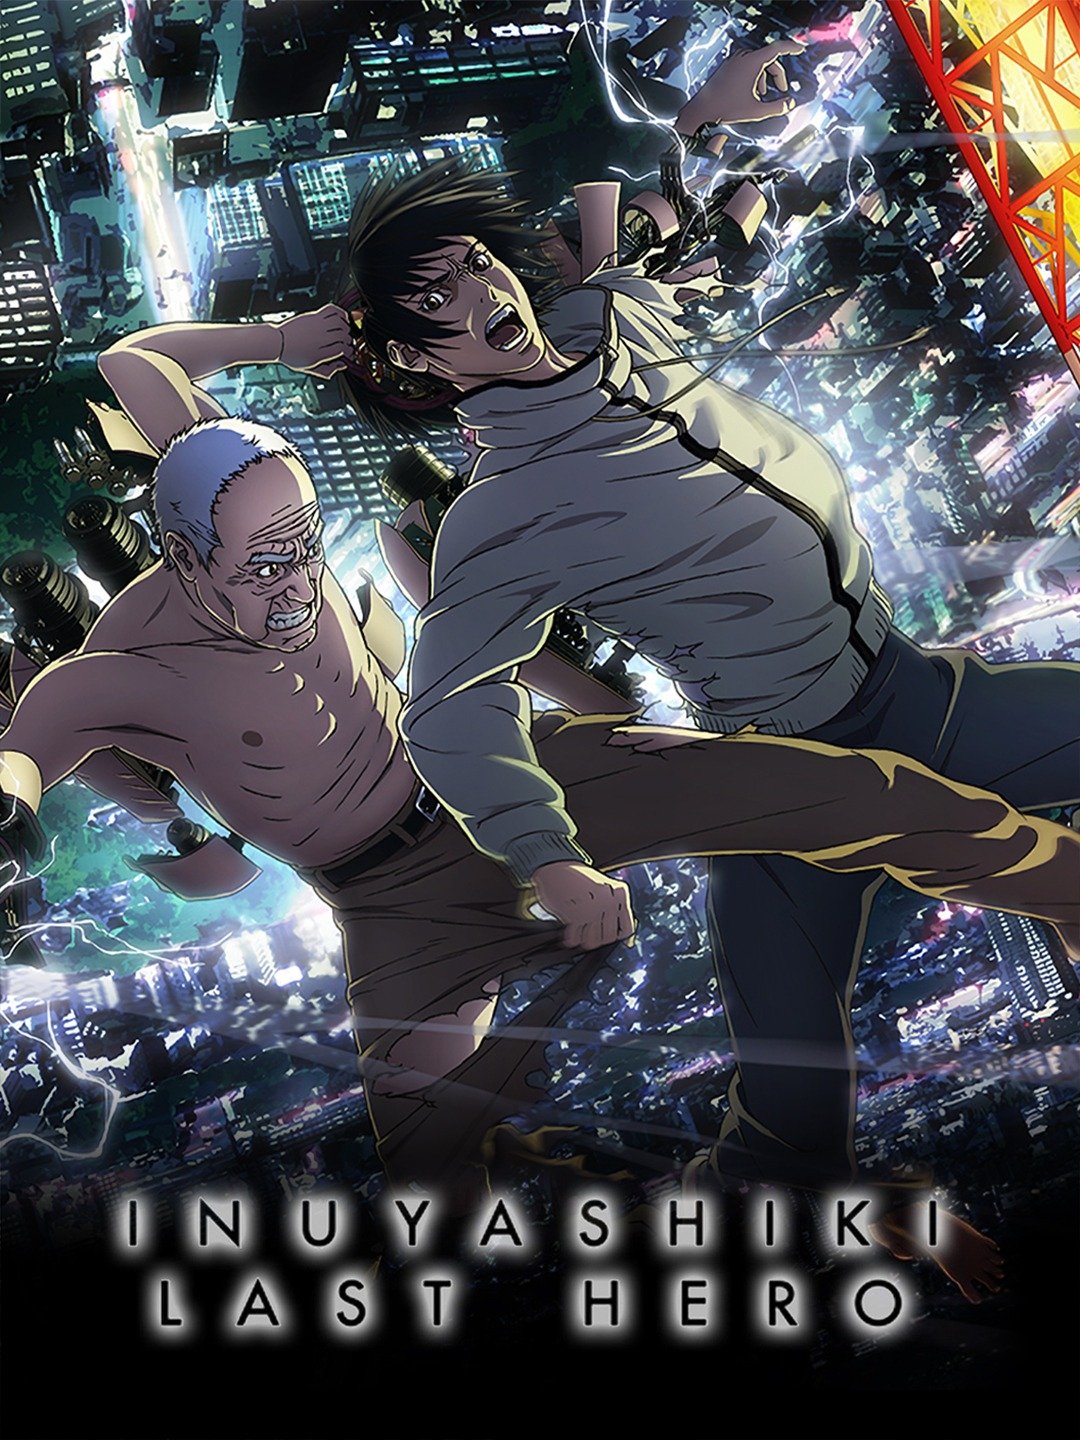 Where to watch Inuyashiki Last Hero anime - is it on Crunchyroll now?